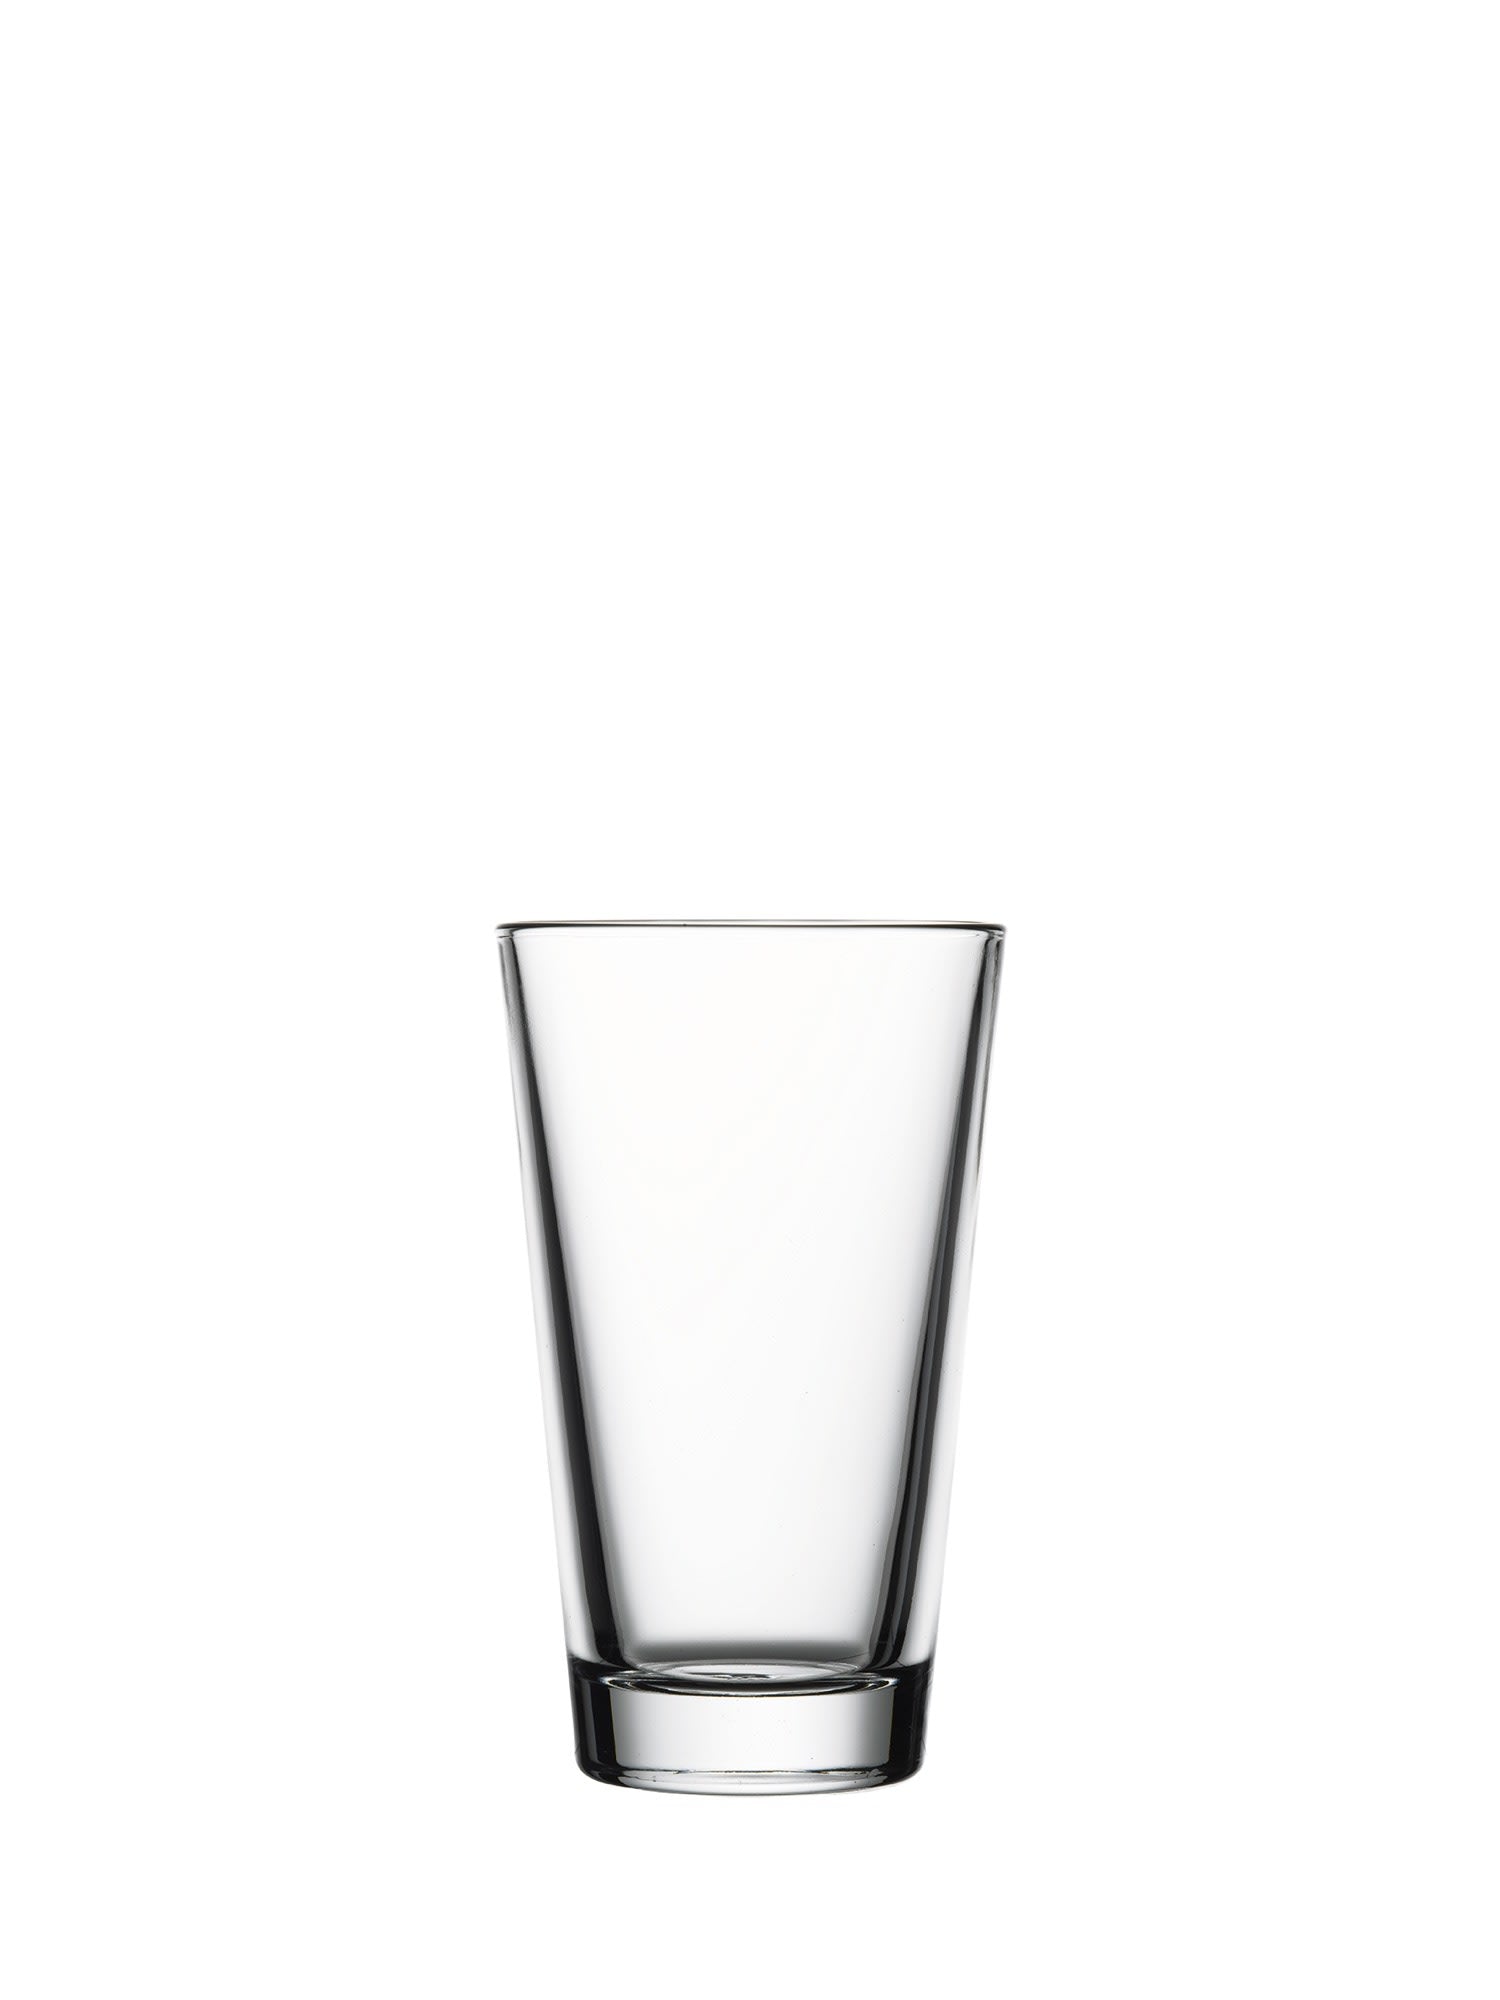 Make your drink serving memorable with this set of 6 Parma Longdrink glasses, adding an elegant touch